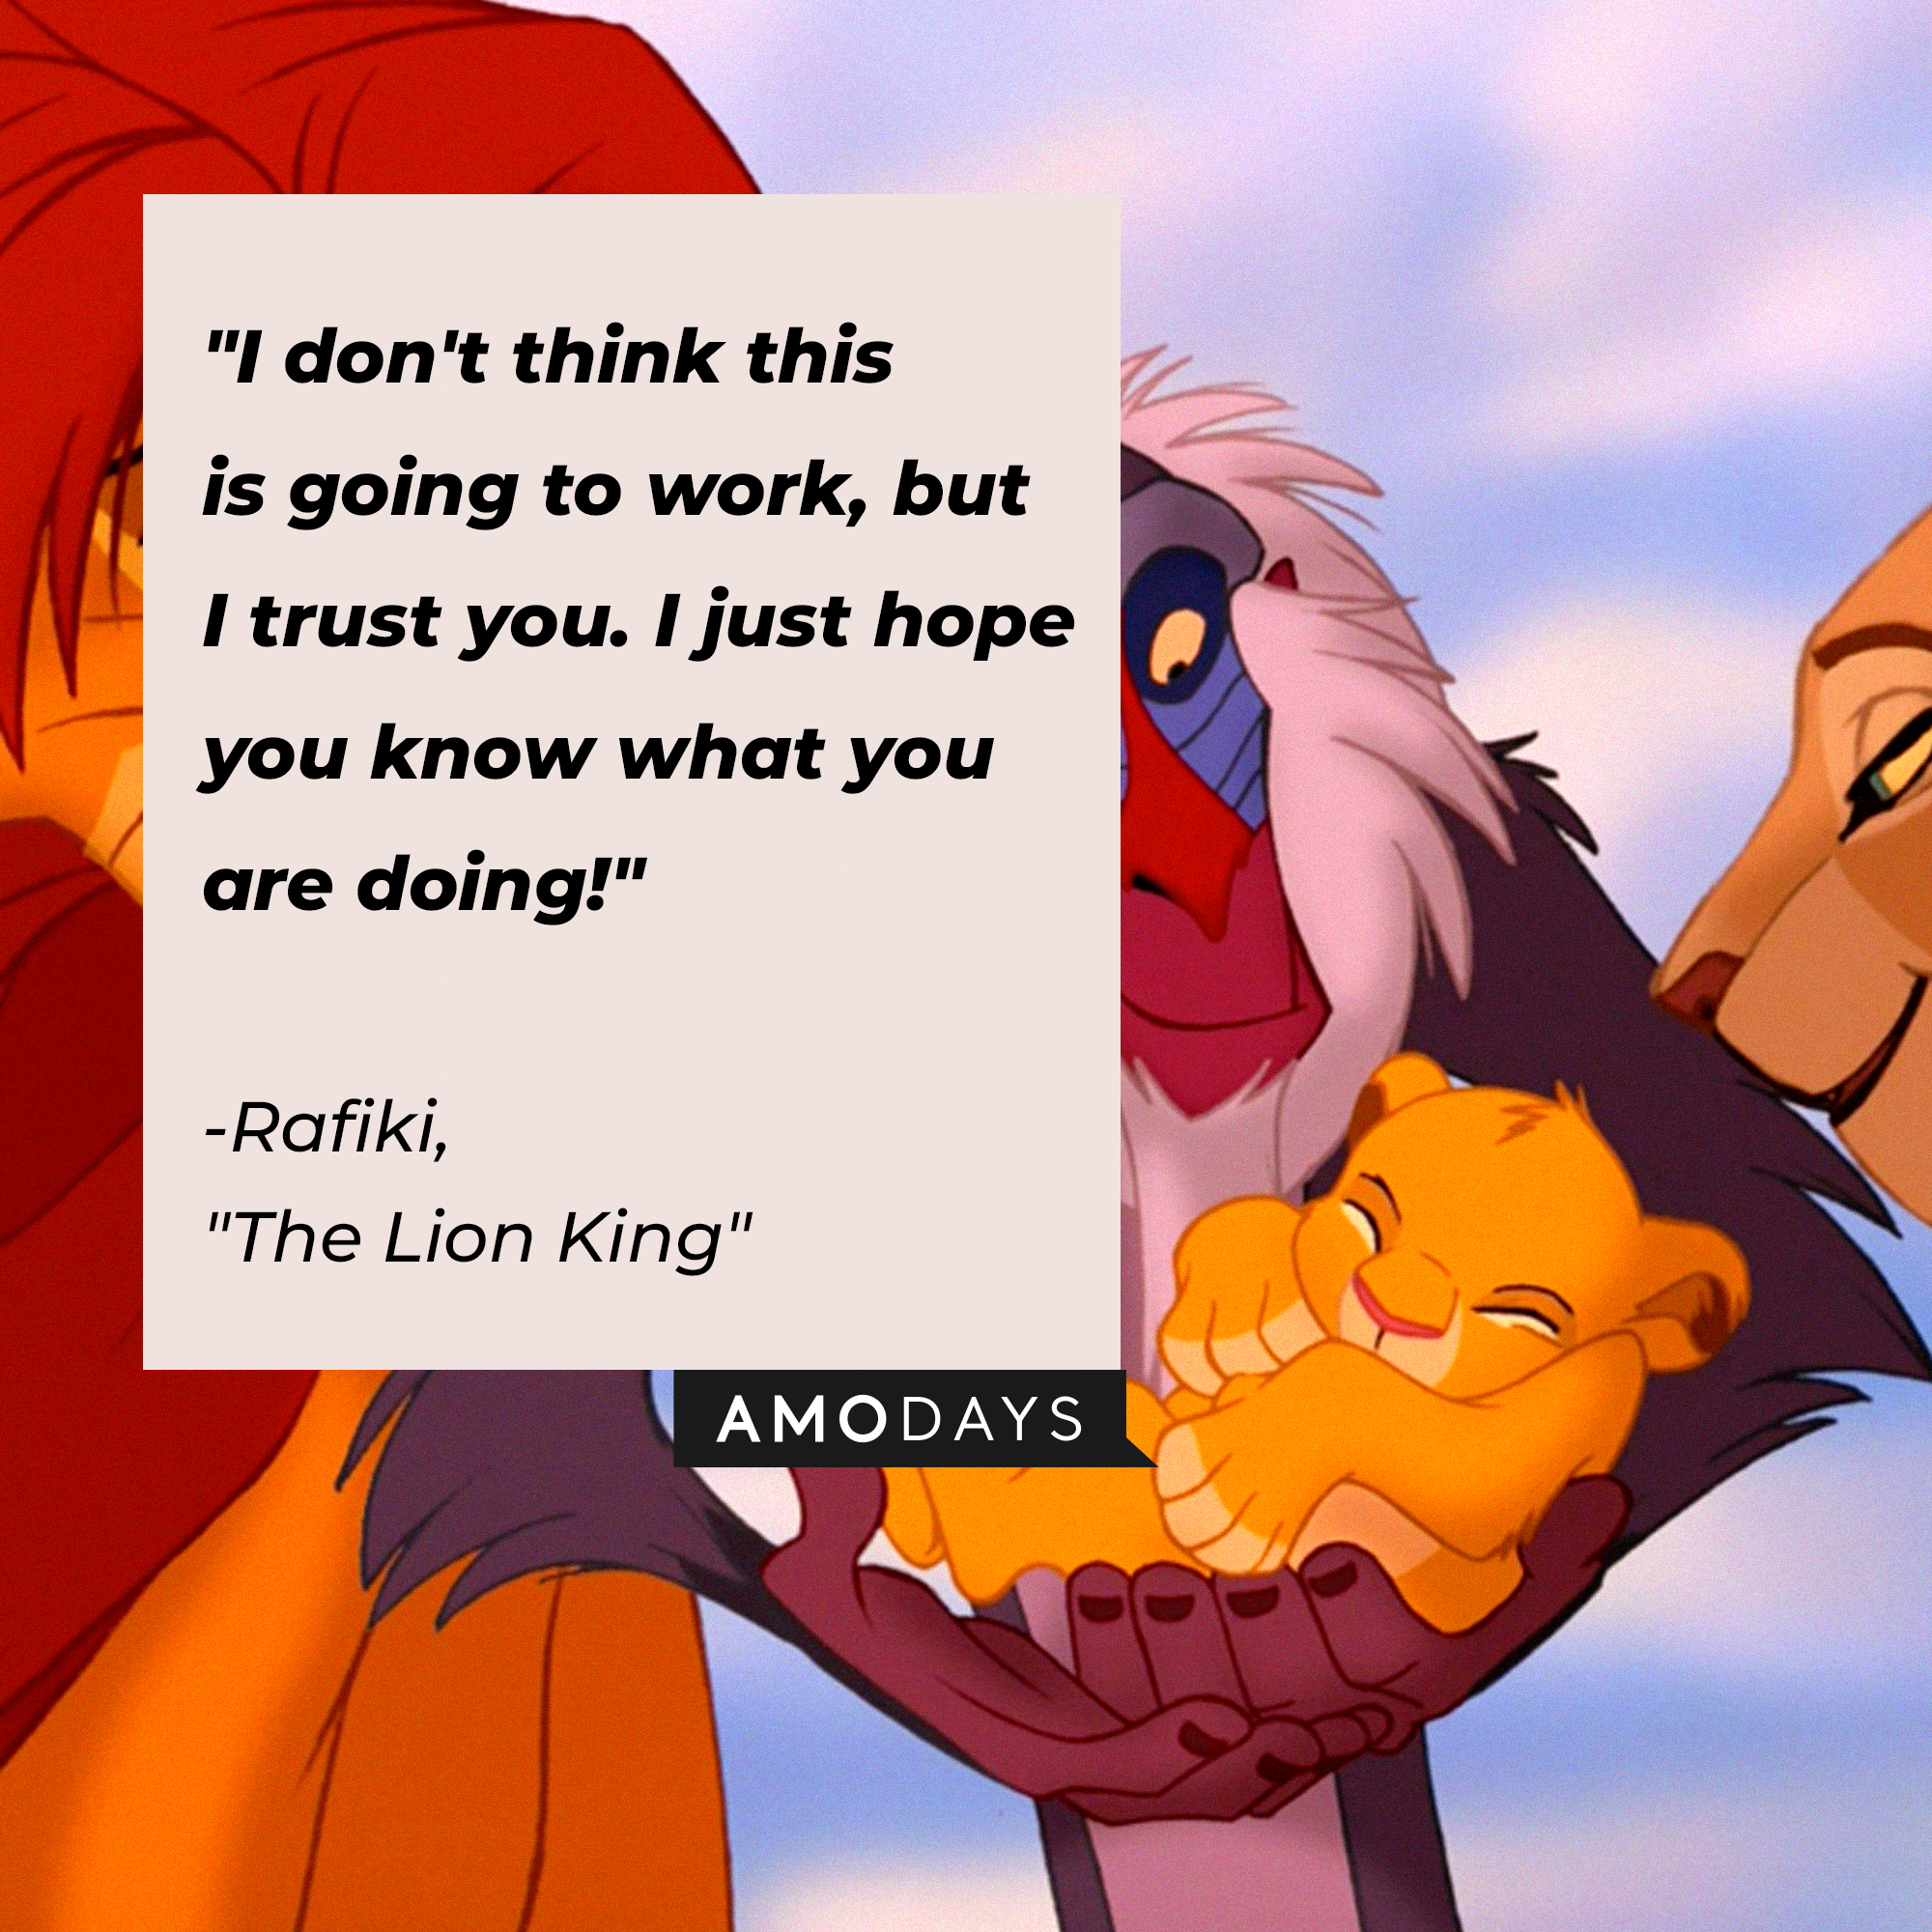 Rafiki with his quote: "I don't think this is going to work, but I trust you. I just hope you know what you are doing!" | Source: Facebook.com/DisneyTheLionKing